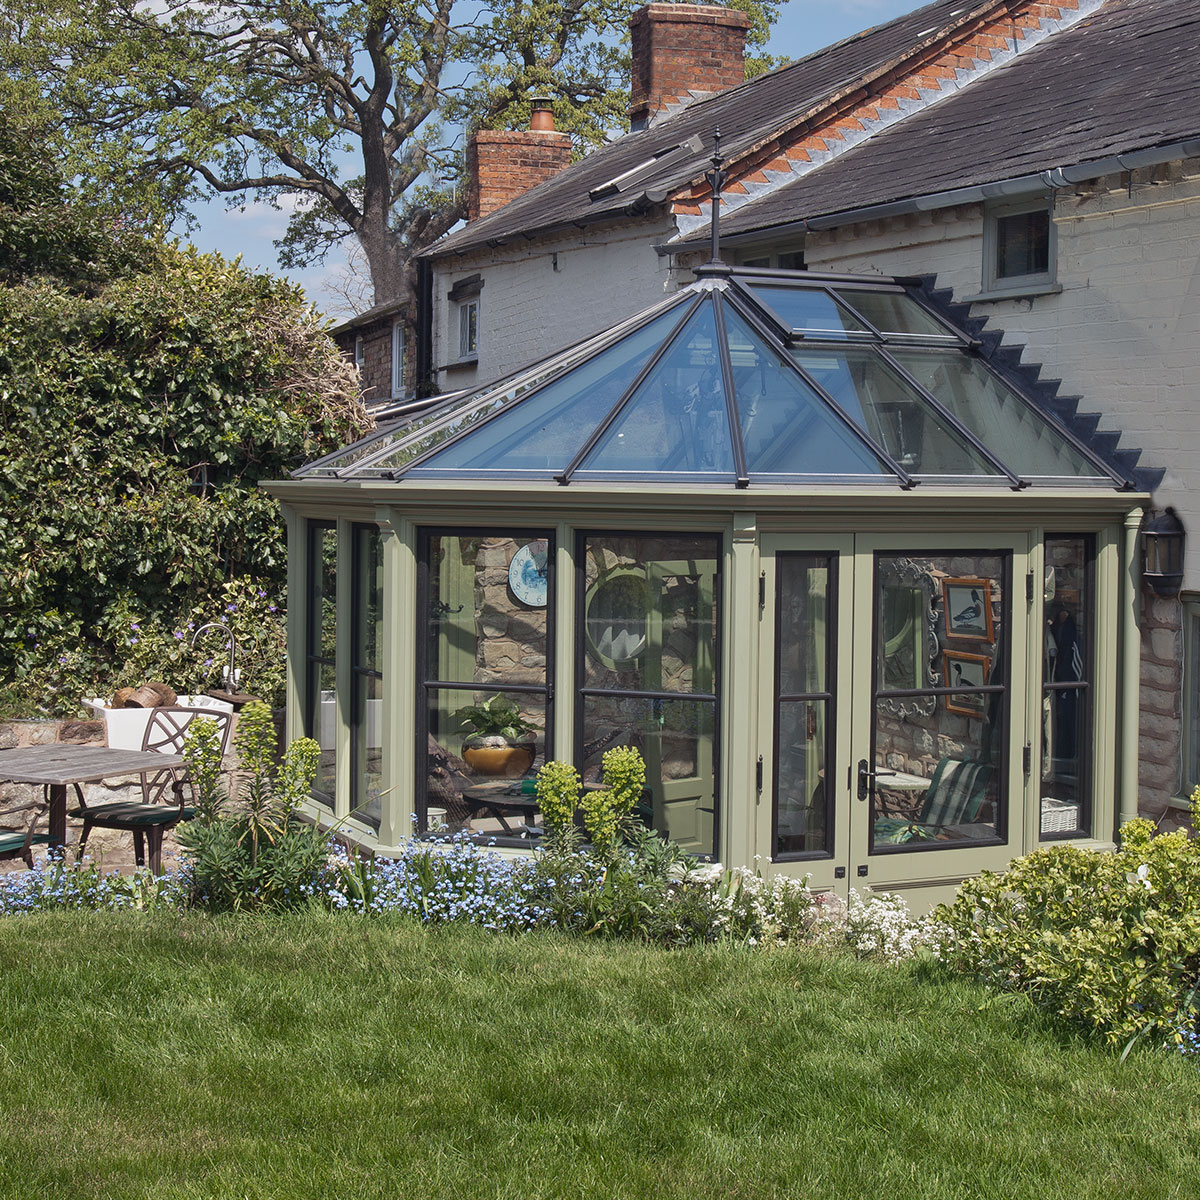 Small conservatory with metal windows